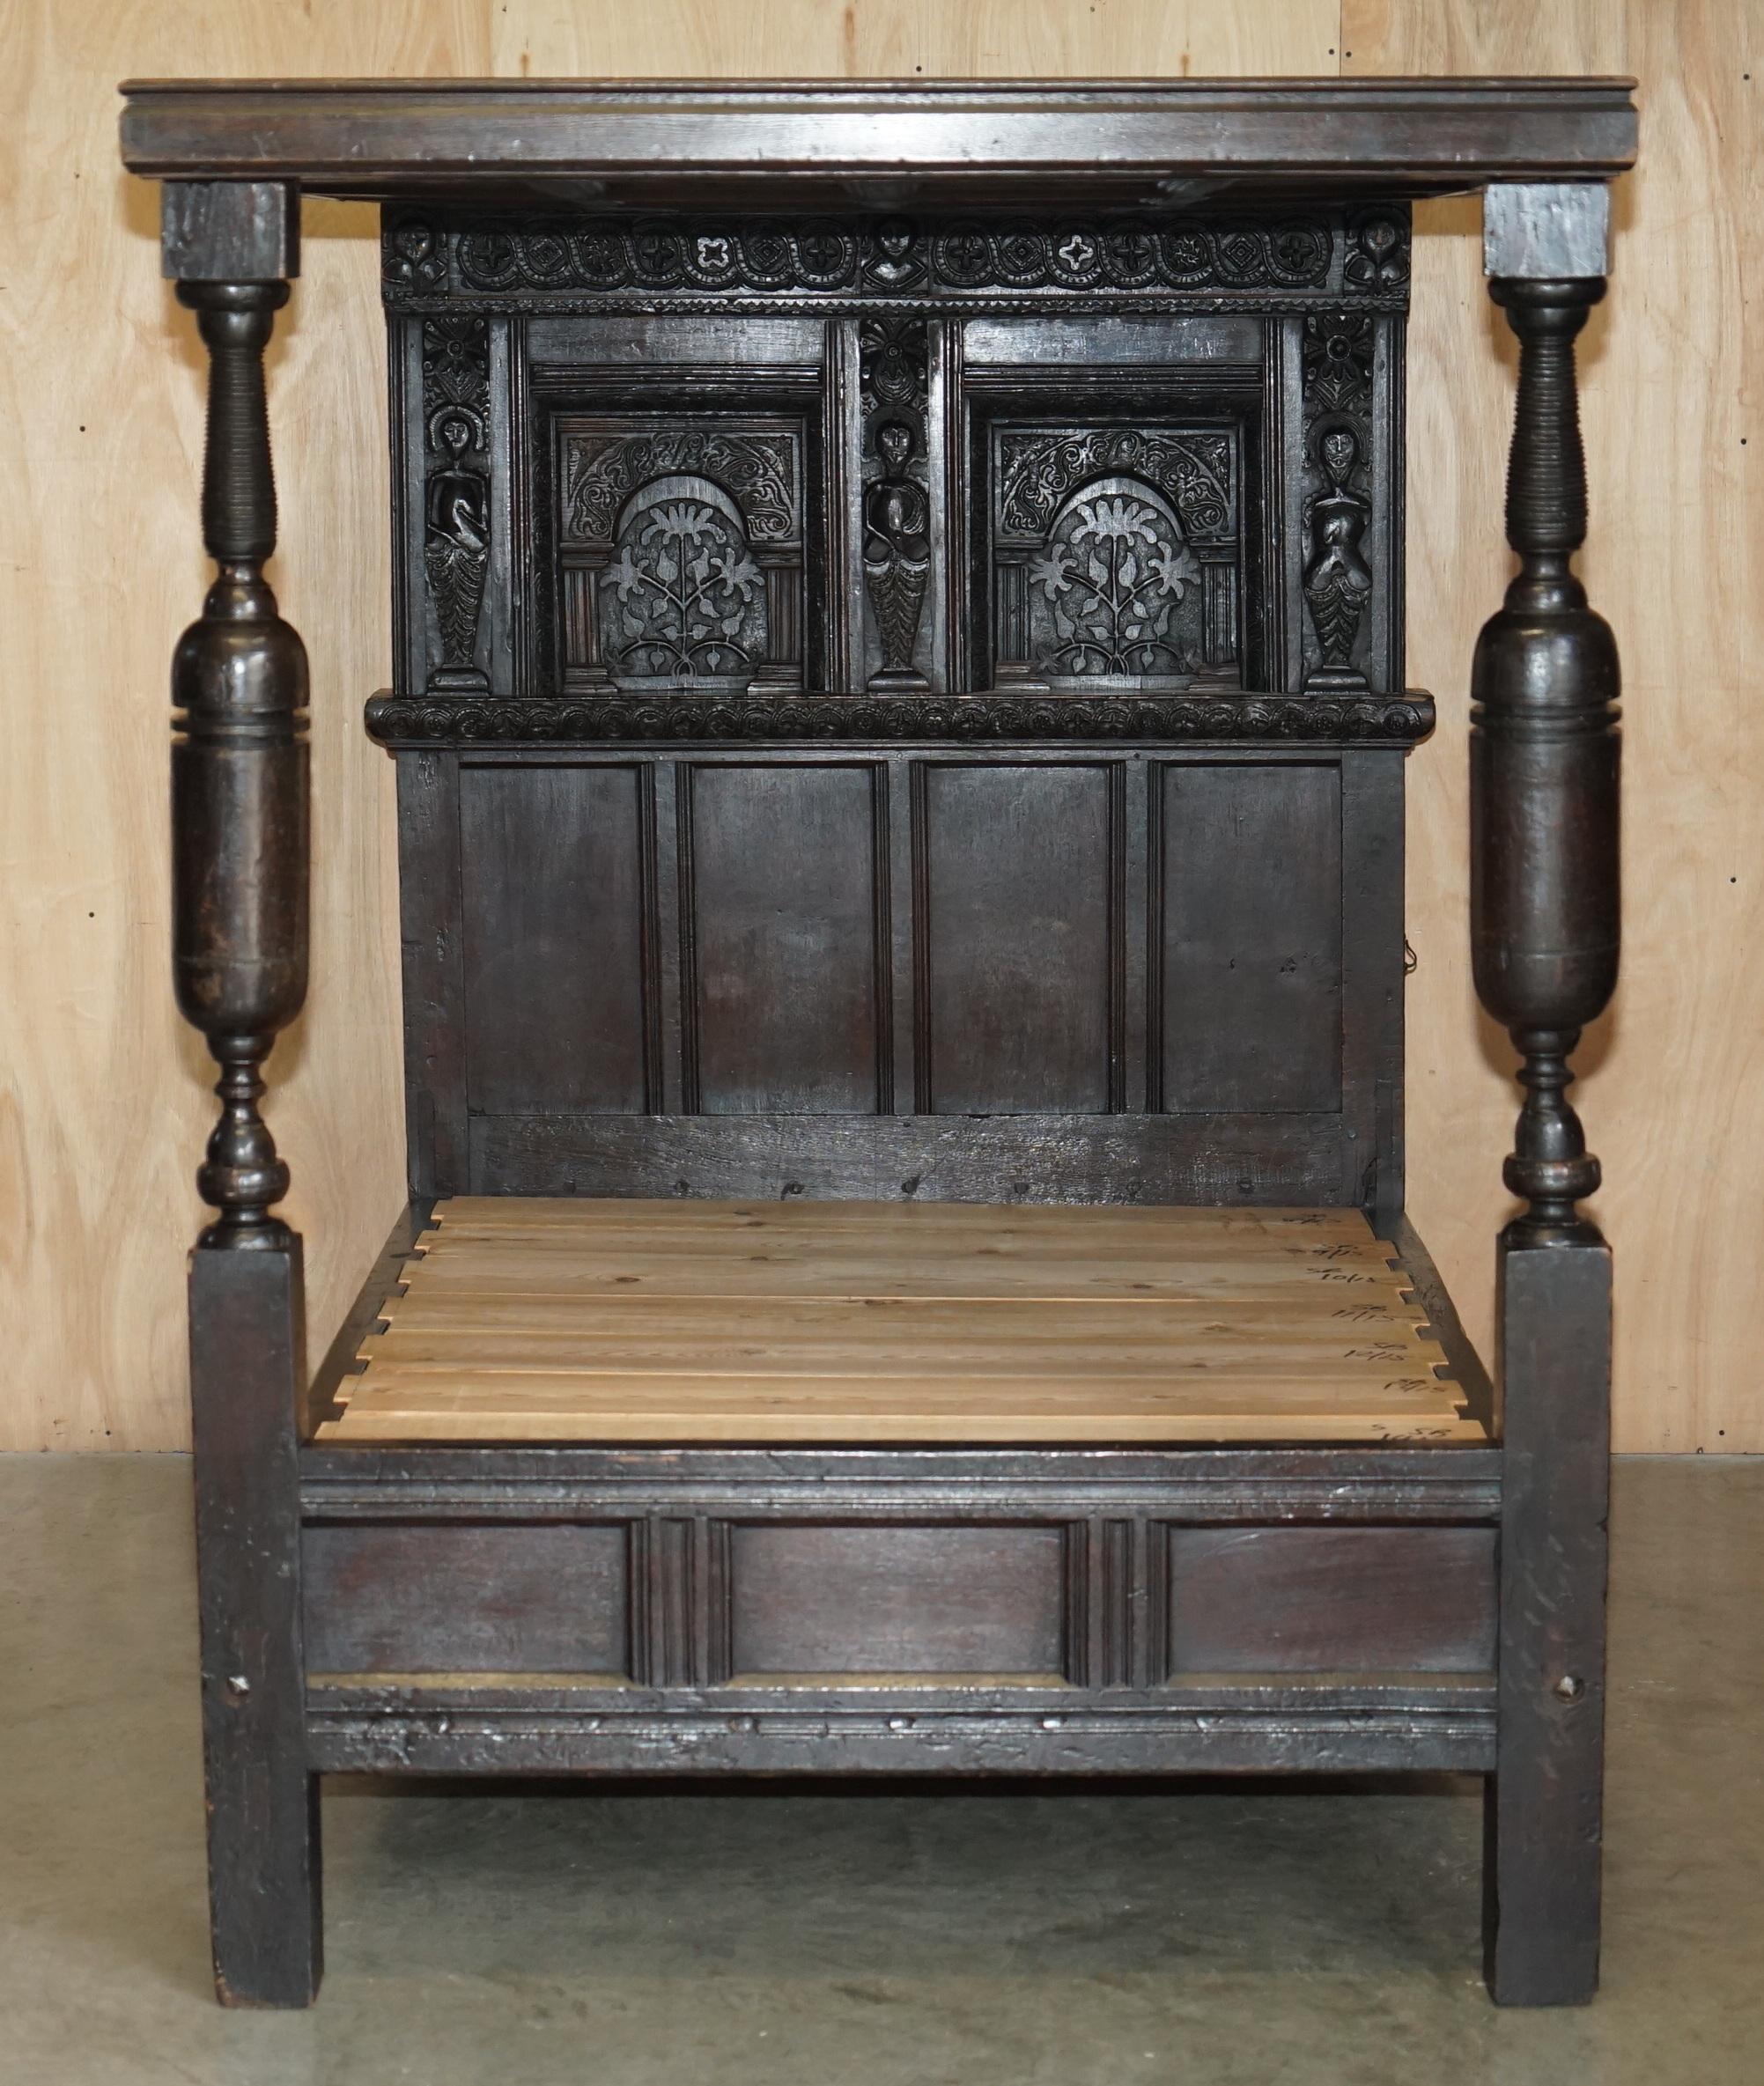 17TH CENTURY JACOBEAN WILLIAM III CIRCA 1650 ENGLiSH OAK TESTER FOUR POSTER BED For Sale 5